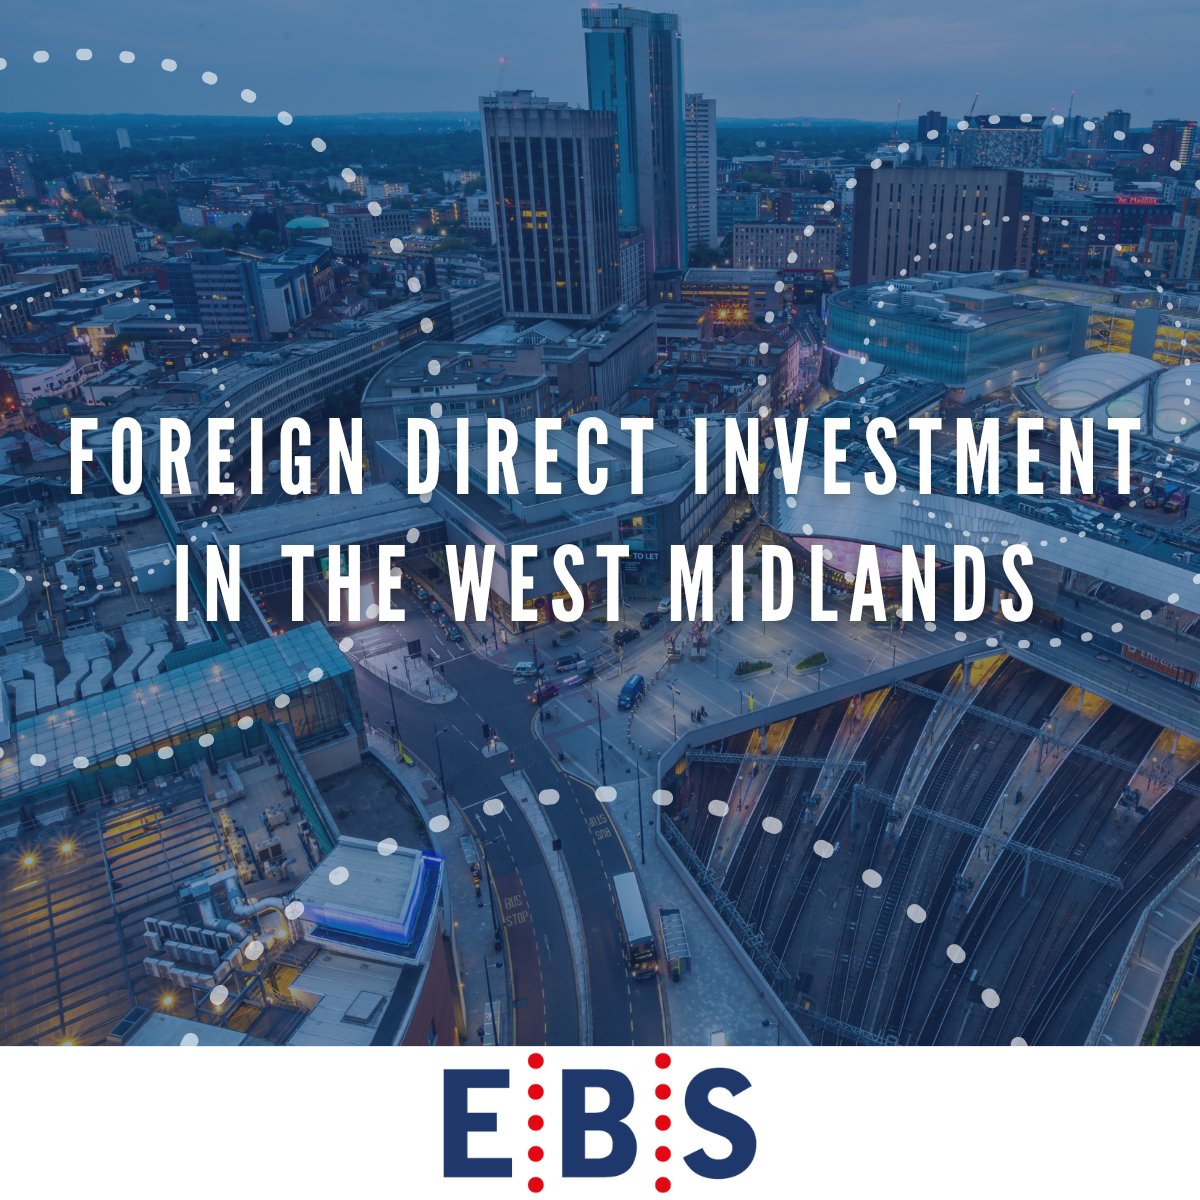 West Midlands is the UK’s top regional location for attracting Foreign Direct Investment (FDI) outside London. We assist businesses wanting to expand into the growing UK economy, supporting with accounting services and company formation. bit.ly/3OfqolX